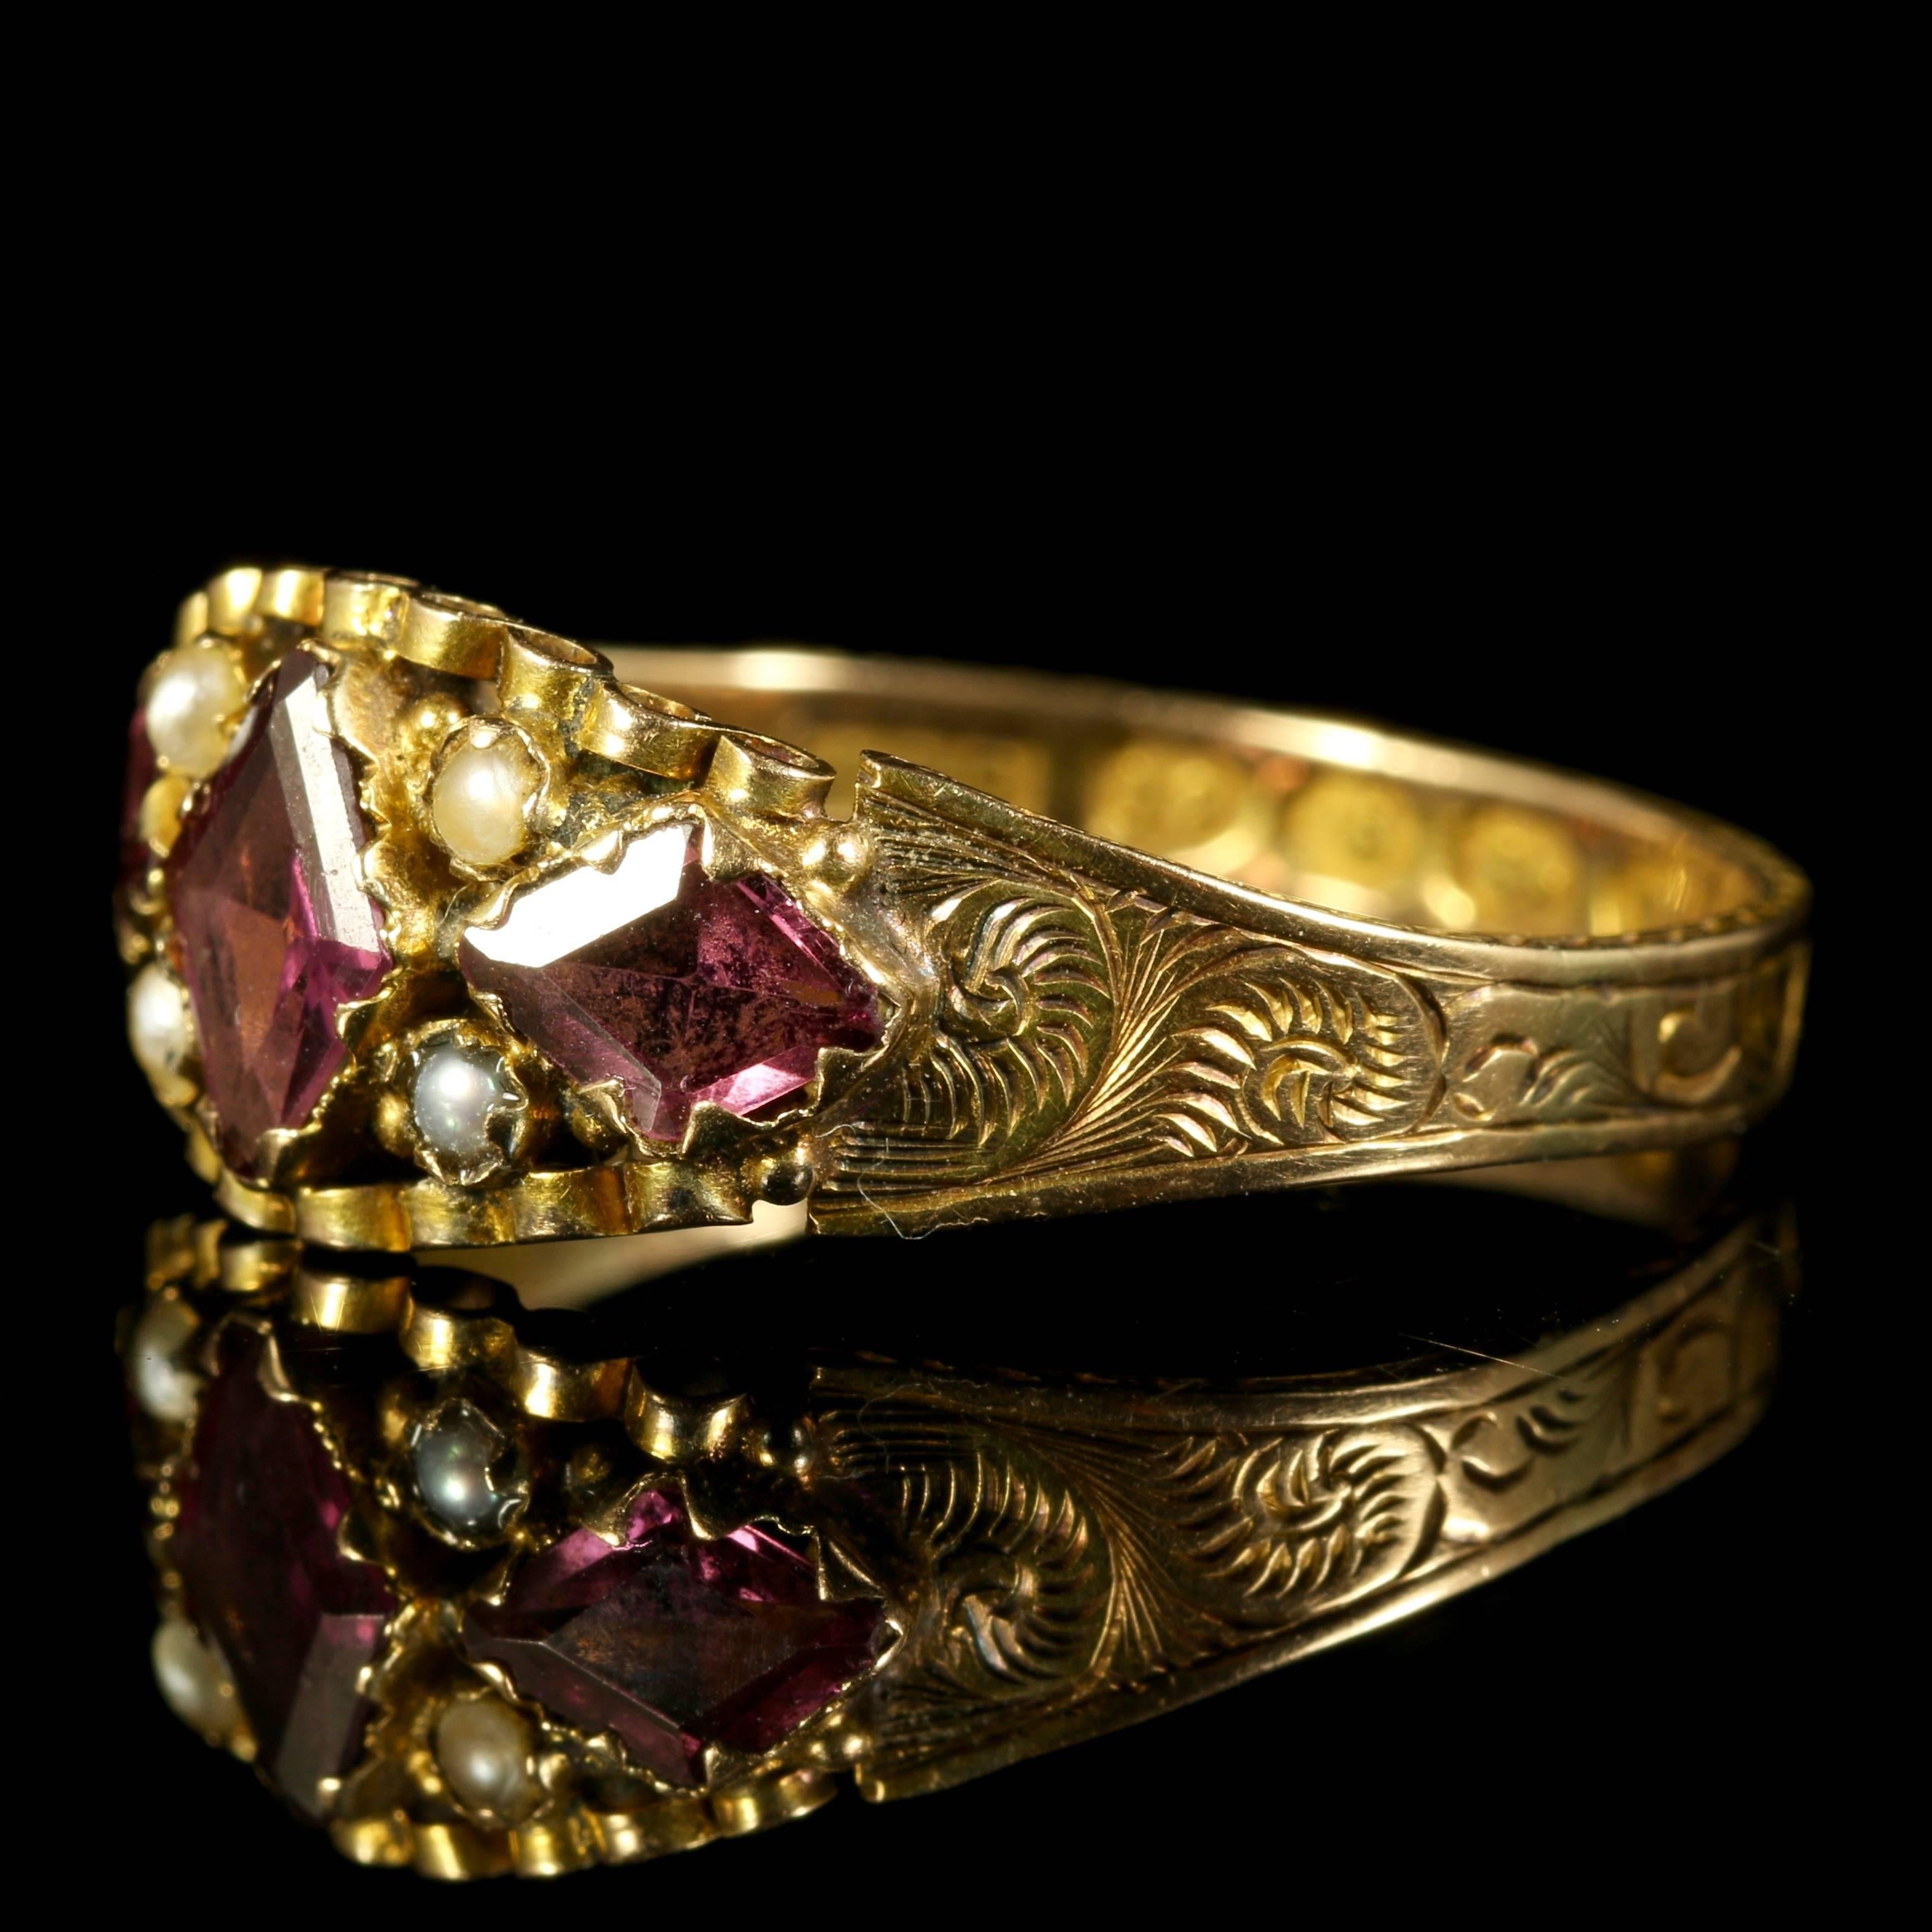 This is a fabulous genuine Georgian ring which is fully hallmarked Birmingham 1791.

A very rare find indeed, to find such an old hallmark on a ring.

The ring is set with lovely Almandine Garnets and Pearls.

Set in rare 12ct gold with beautiful